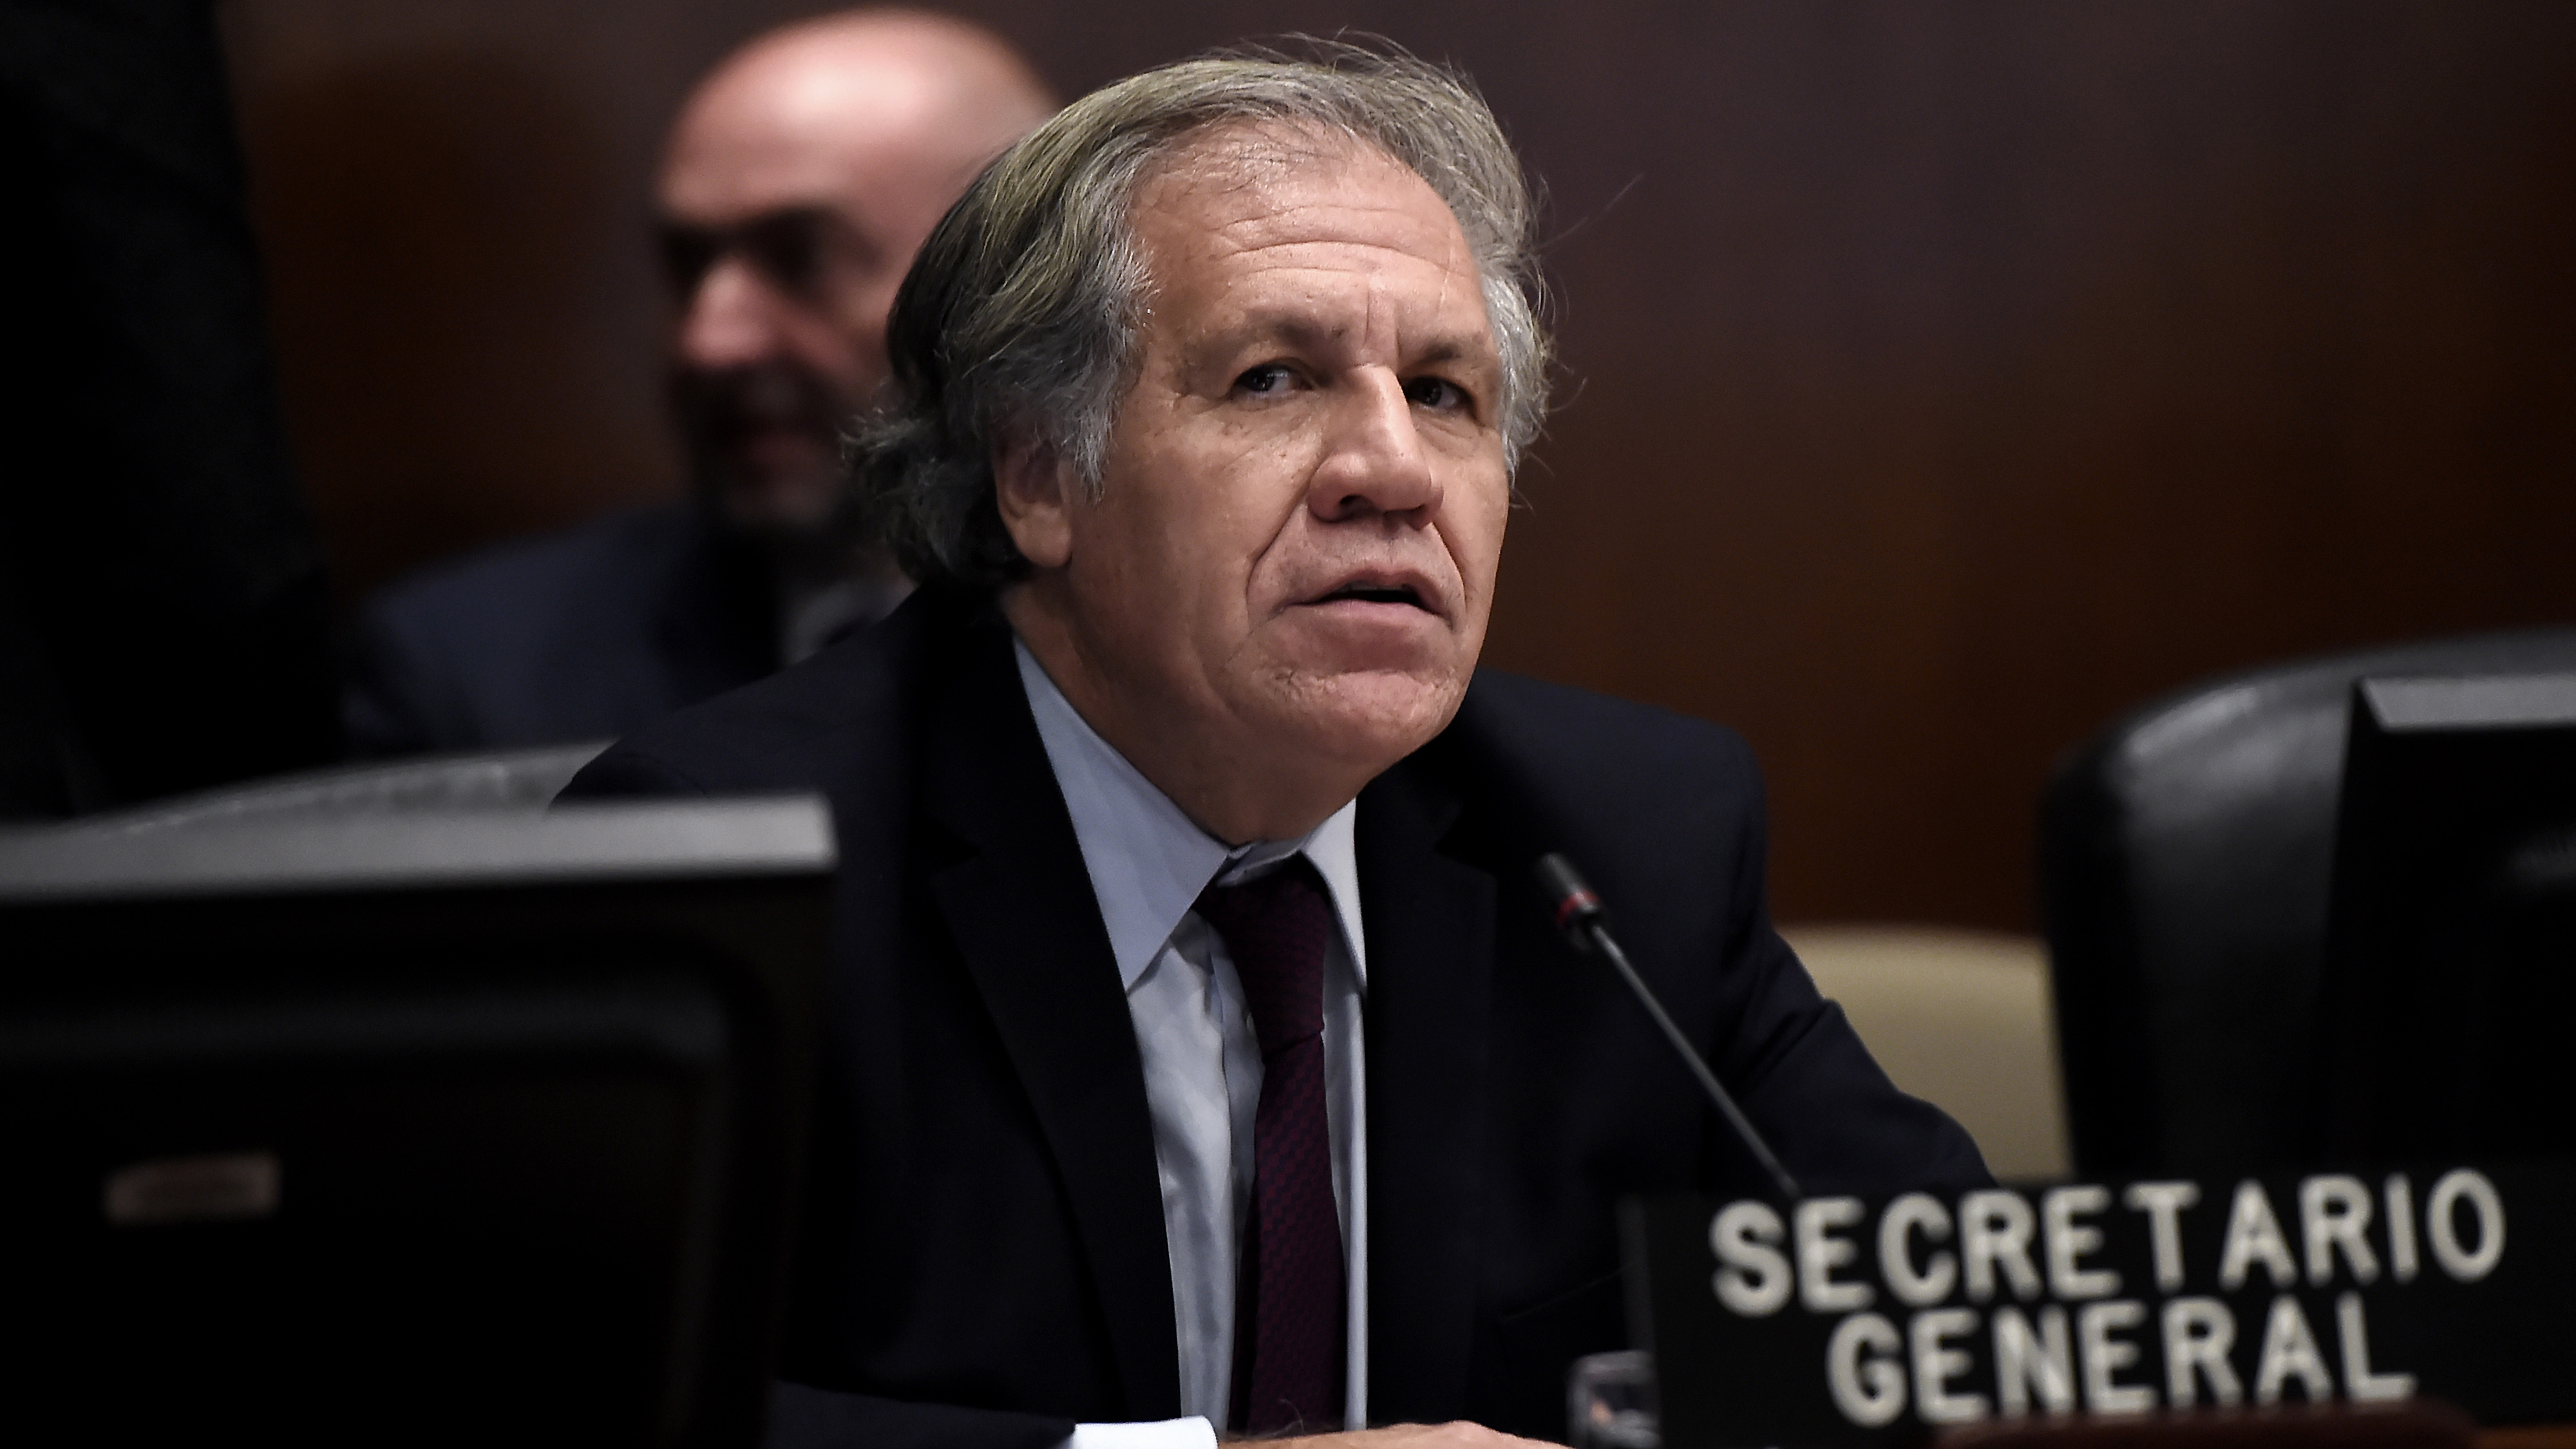 OAS Secretary General Luis Almagro looks on during a meeting of the Permanent Council of the Organization of American States (OAS) about the situation in Bolivia in Washington, DC, on November 12, 2019. (Photo by Olivier Douliery / AFP)